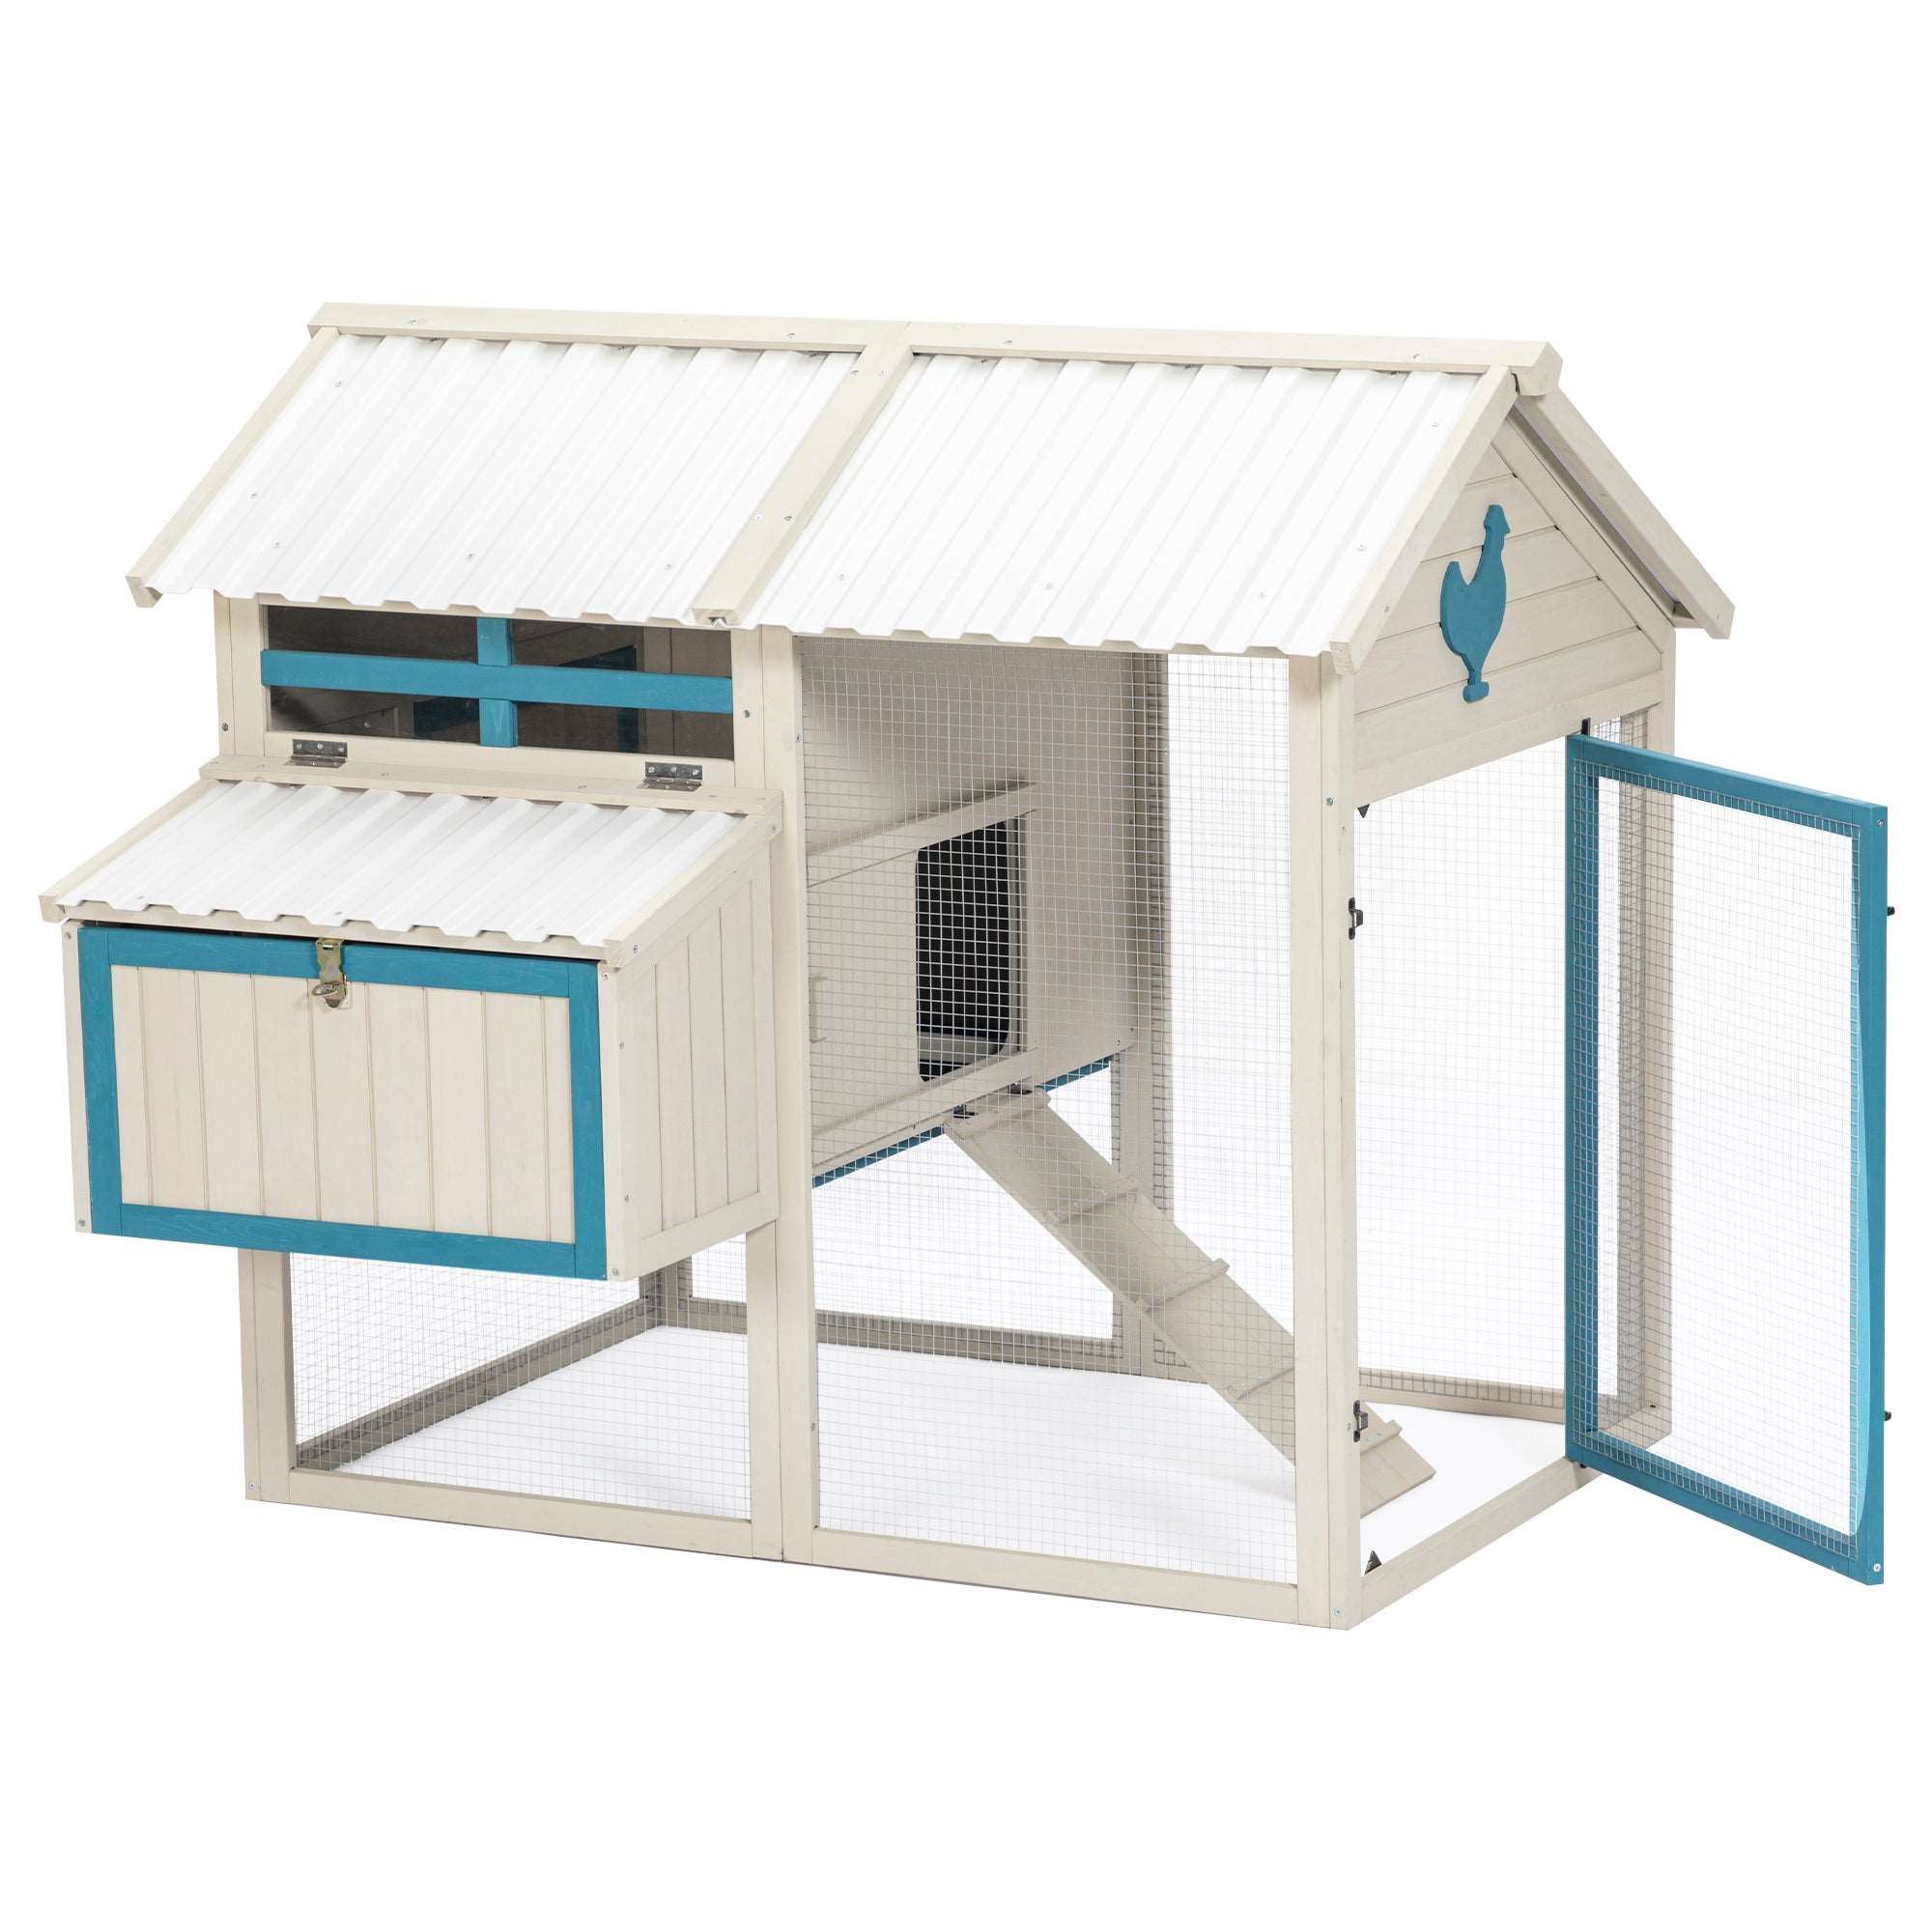 petsfit-waterproof-pvc-roof-chicken-coop-for-5-8-chickens-backyard-hen-house-with-easy-clean-pull-out-tray-integrated-nesting-boxes-for-outdoor-use-09